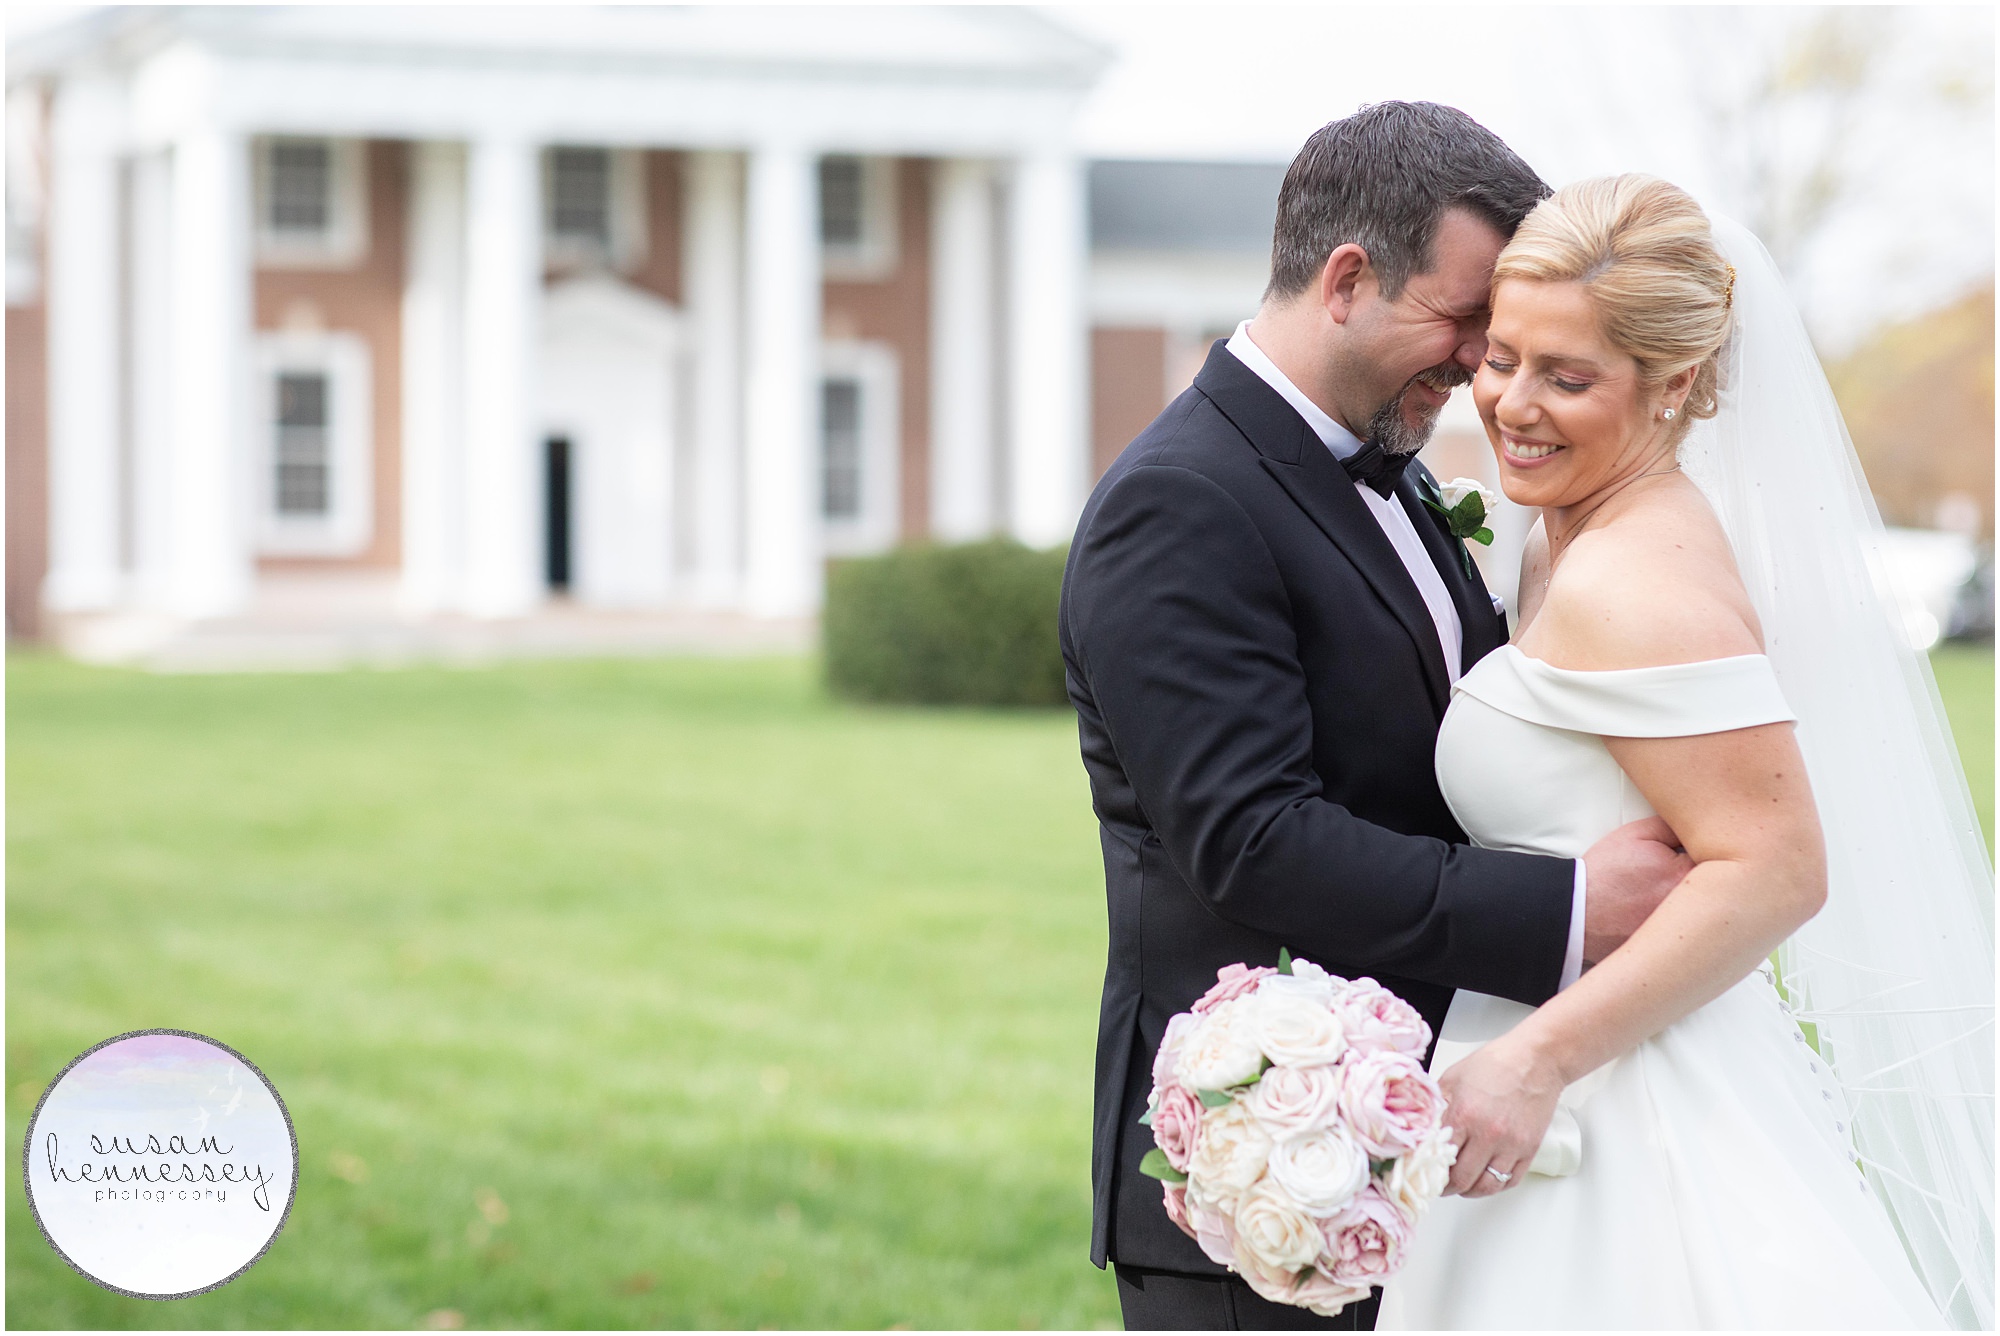 Planning a Micro Wedding? The First Presbyterian Church of Moorestown is the perfect church to exchange your vows